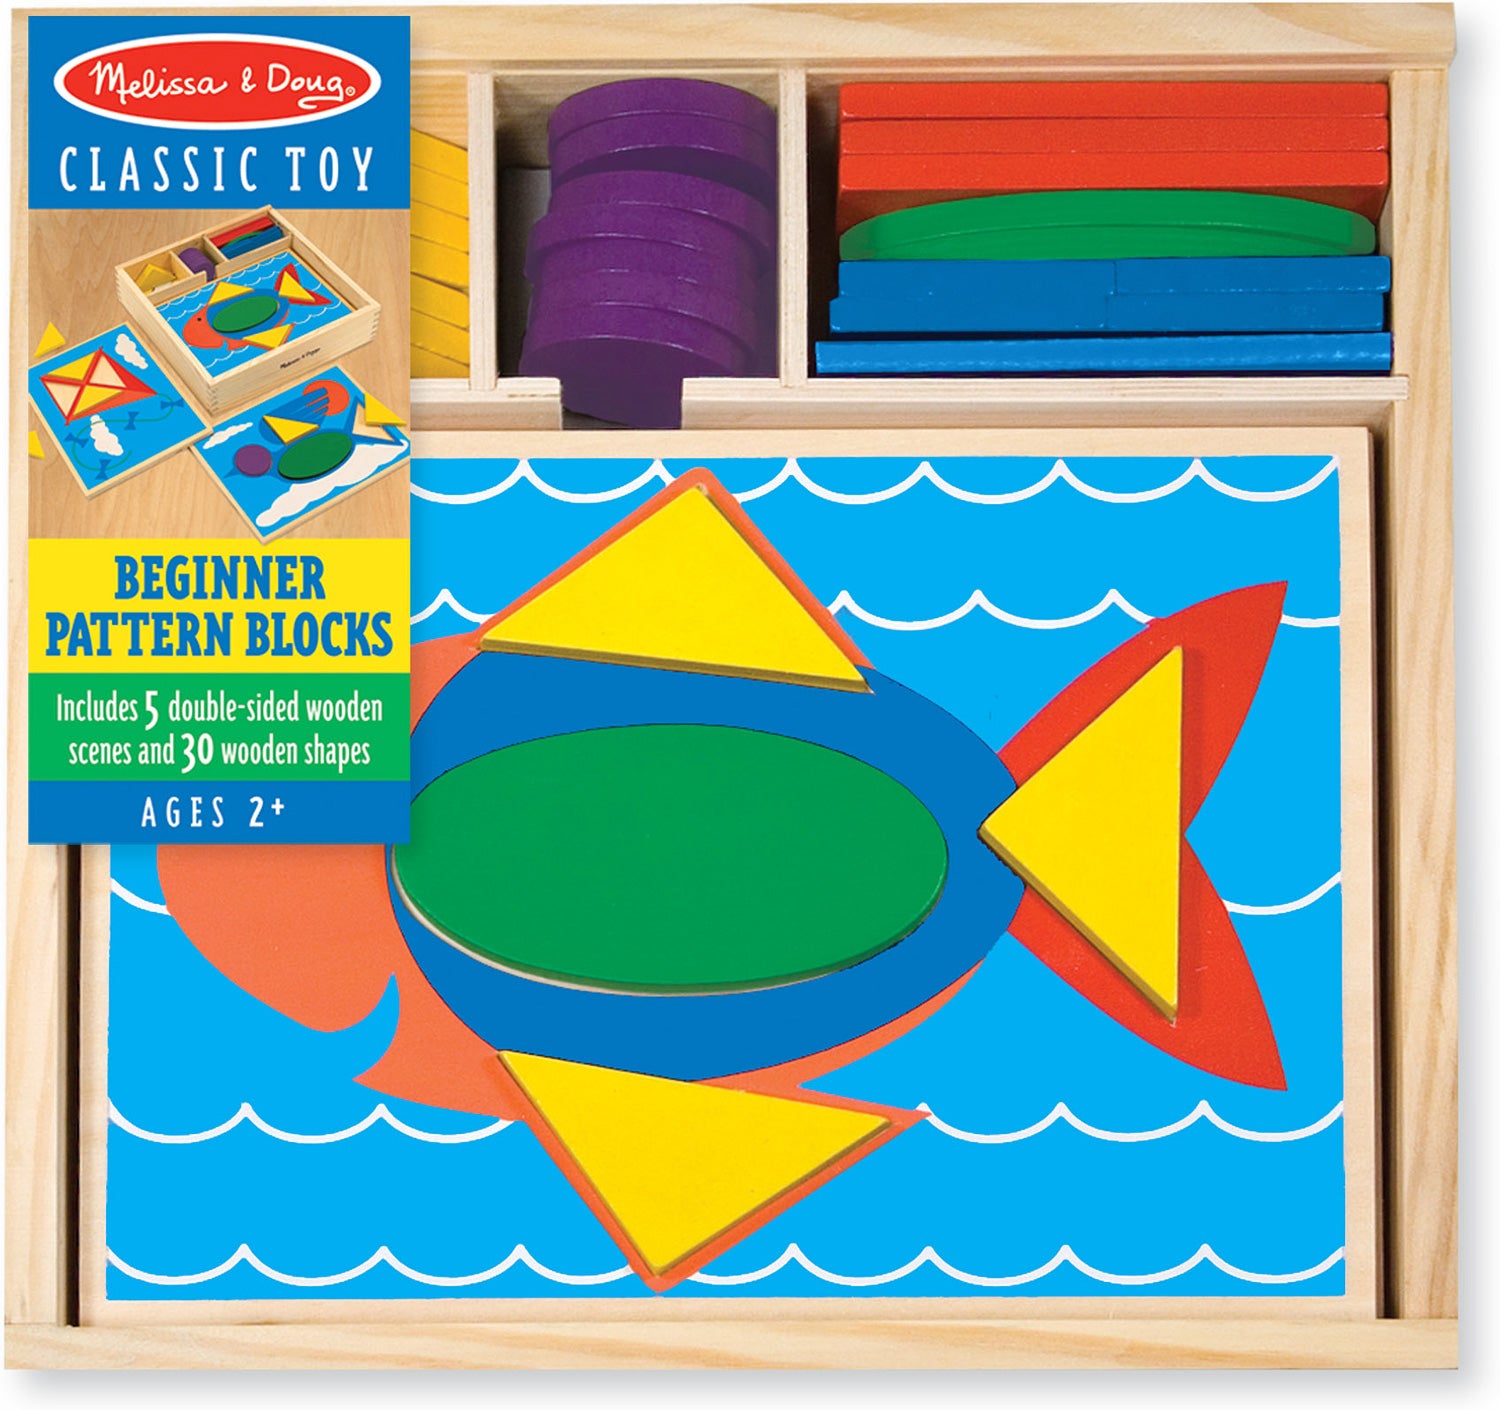 Melissa and Doug Beginner Pattern Blocks 000772005289 Classic Toy Ages 2+